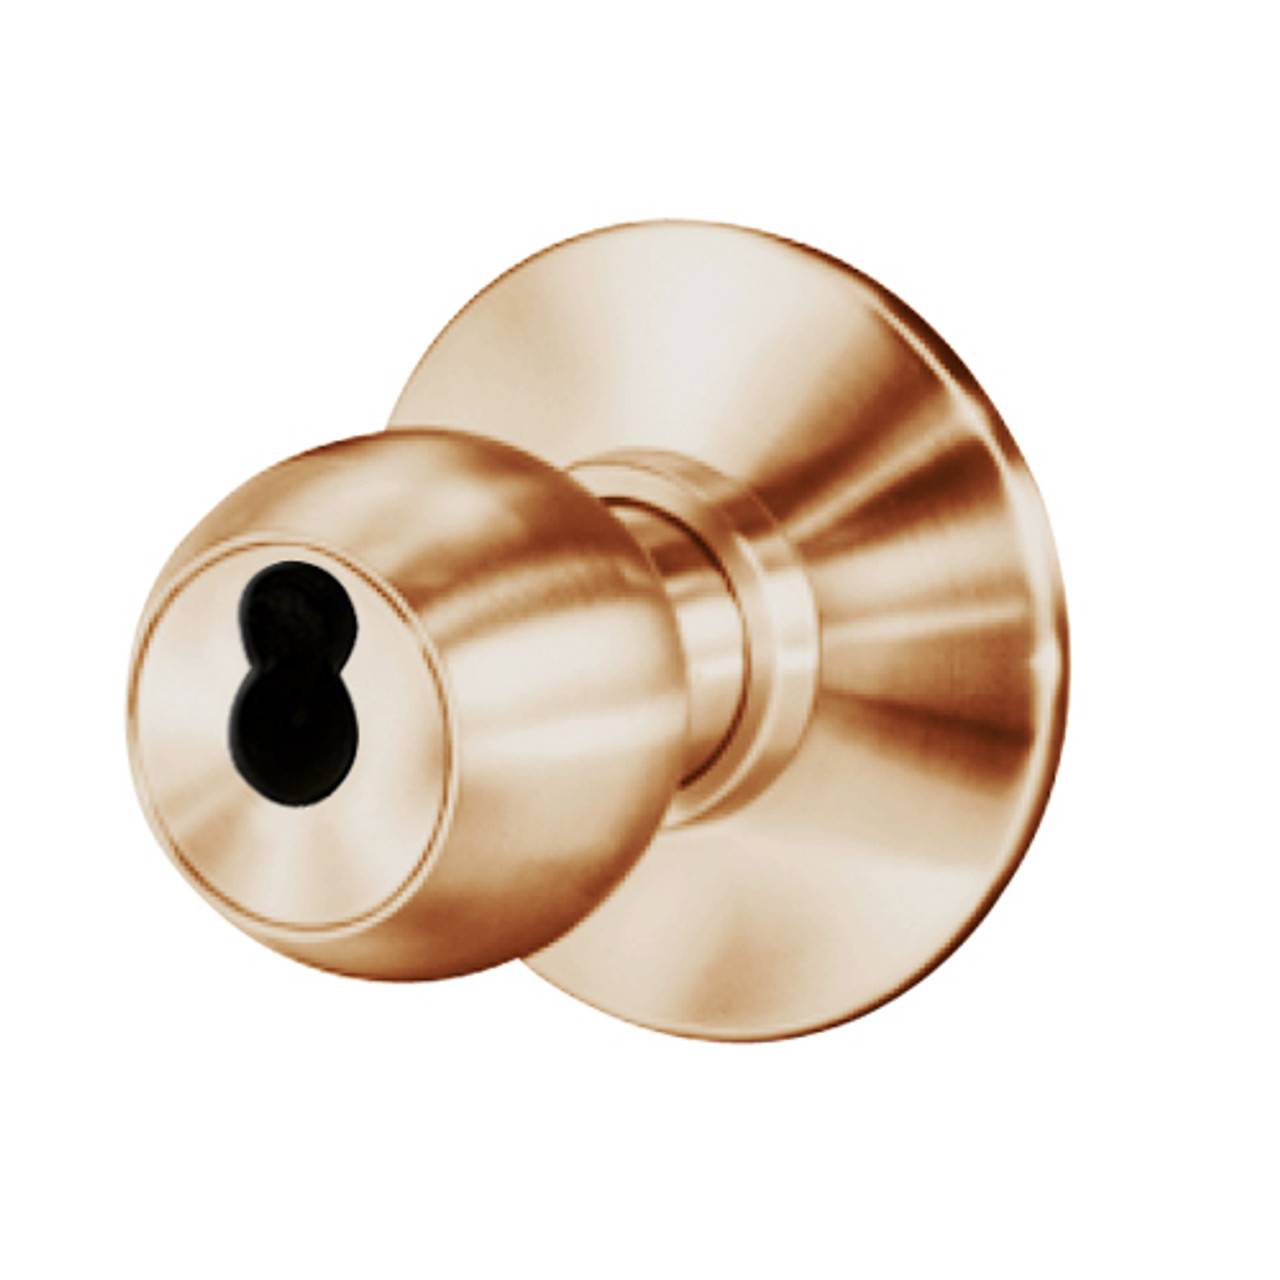 8K37A4DS3612 Best 8K Series Dormitory/Storeroom Heavy Duty Cylindrical Knob Locks with Round Style in Satin Bronze